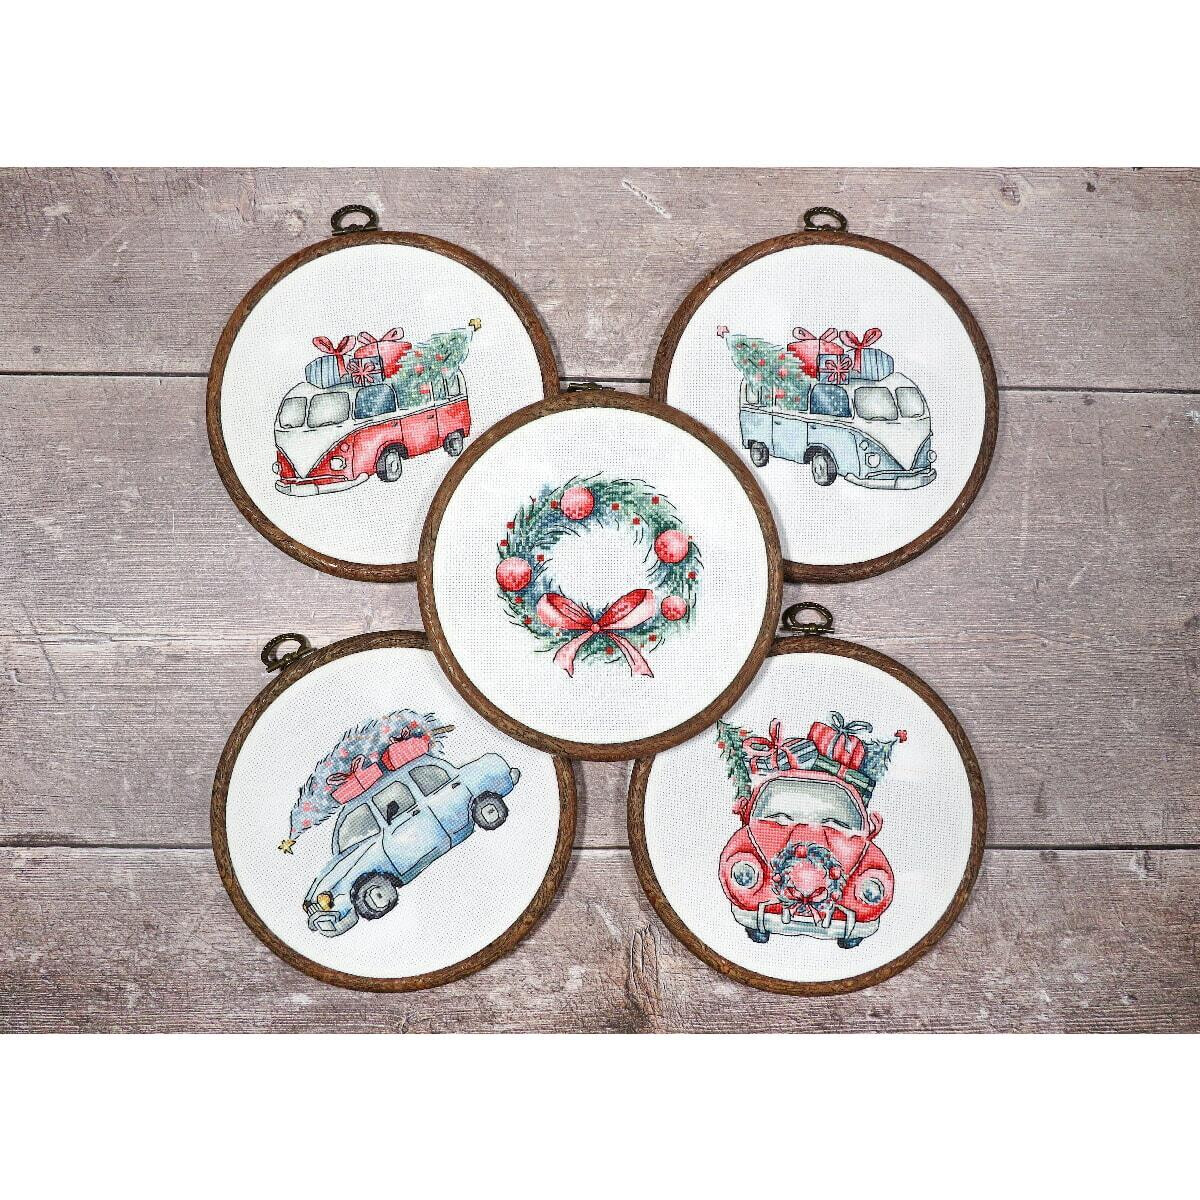 Five round embroidery frames are displayed on a wooden...